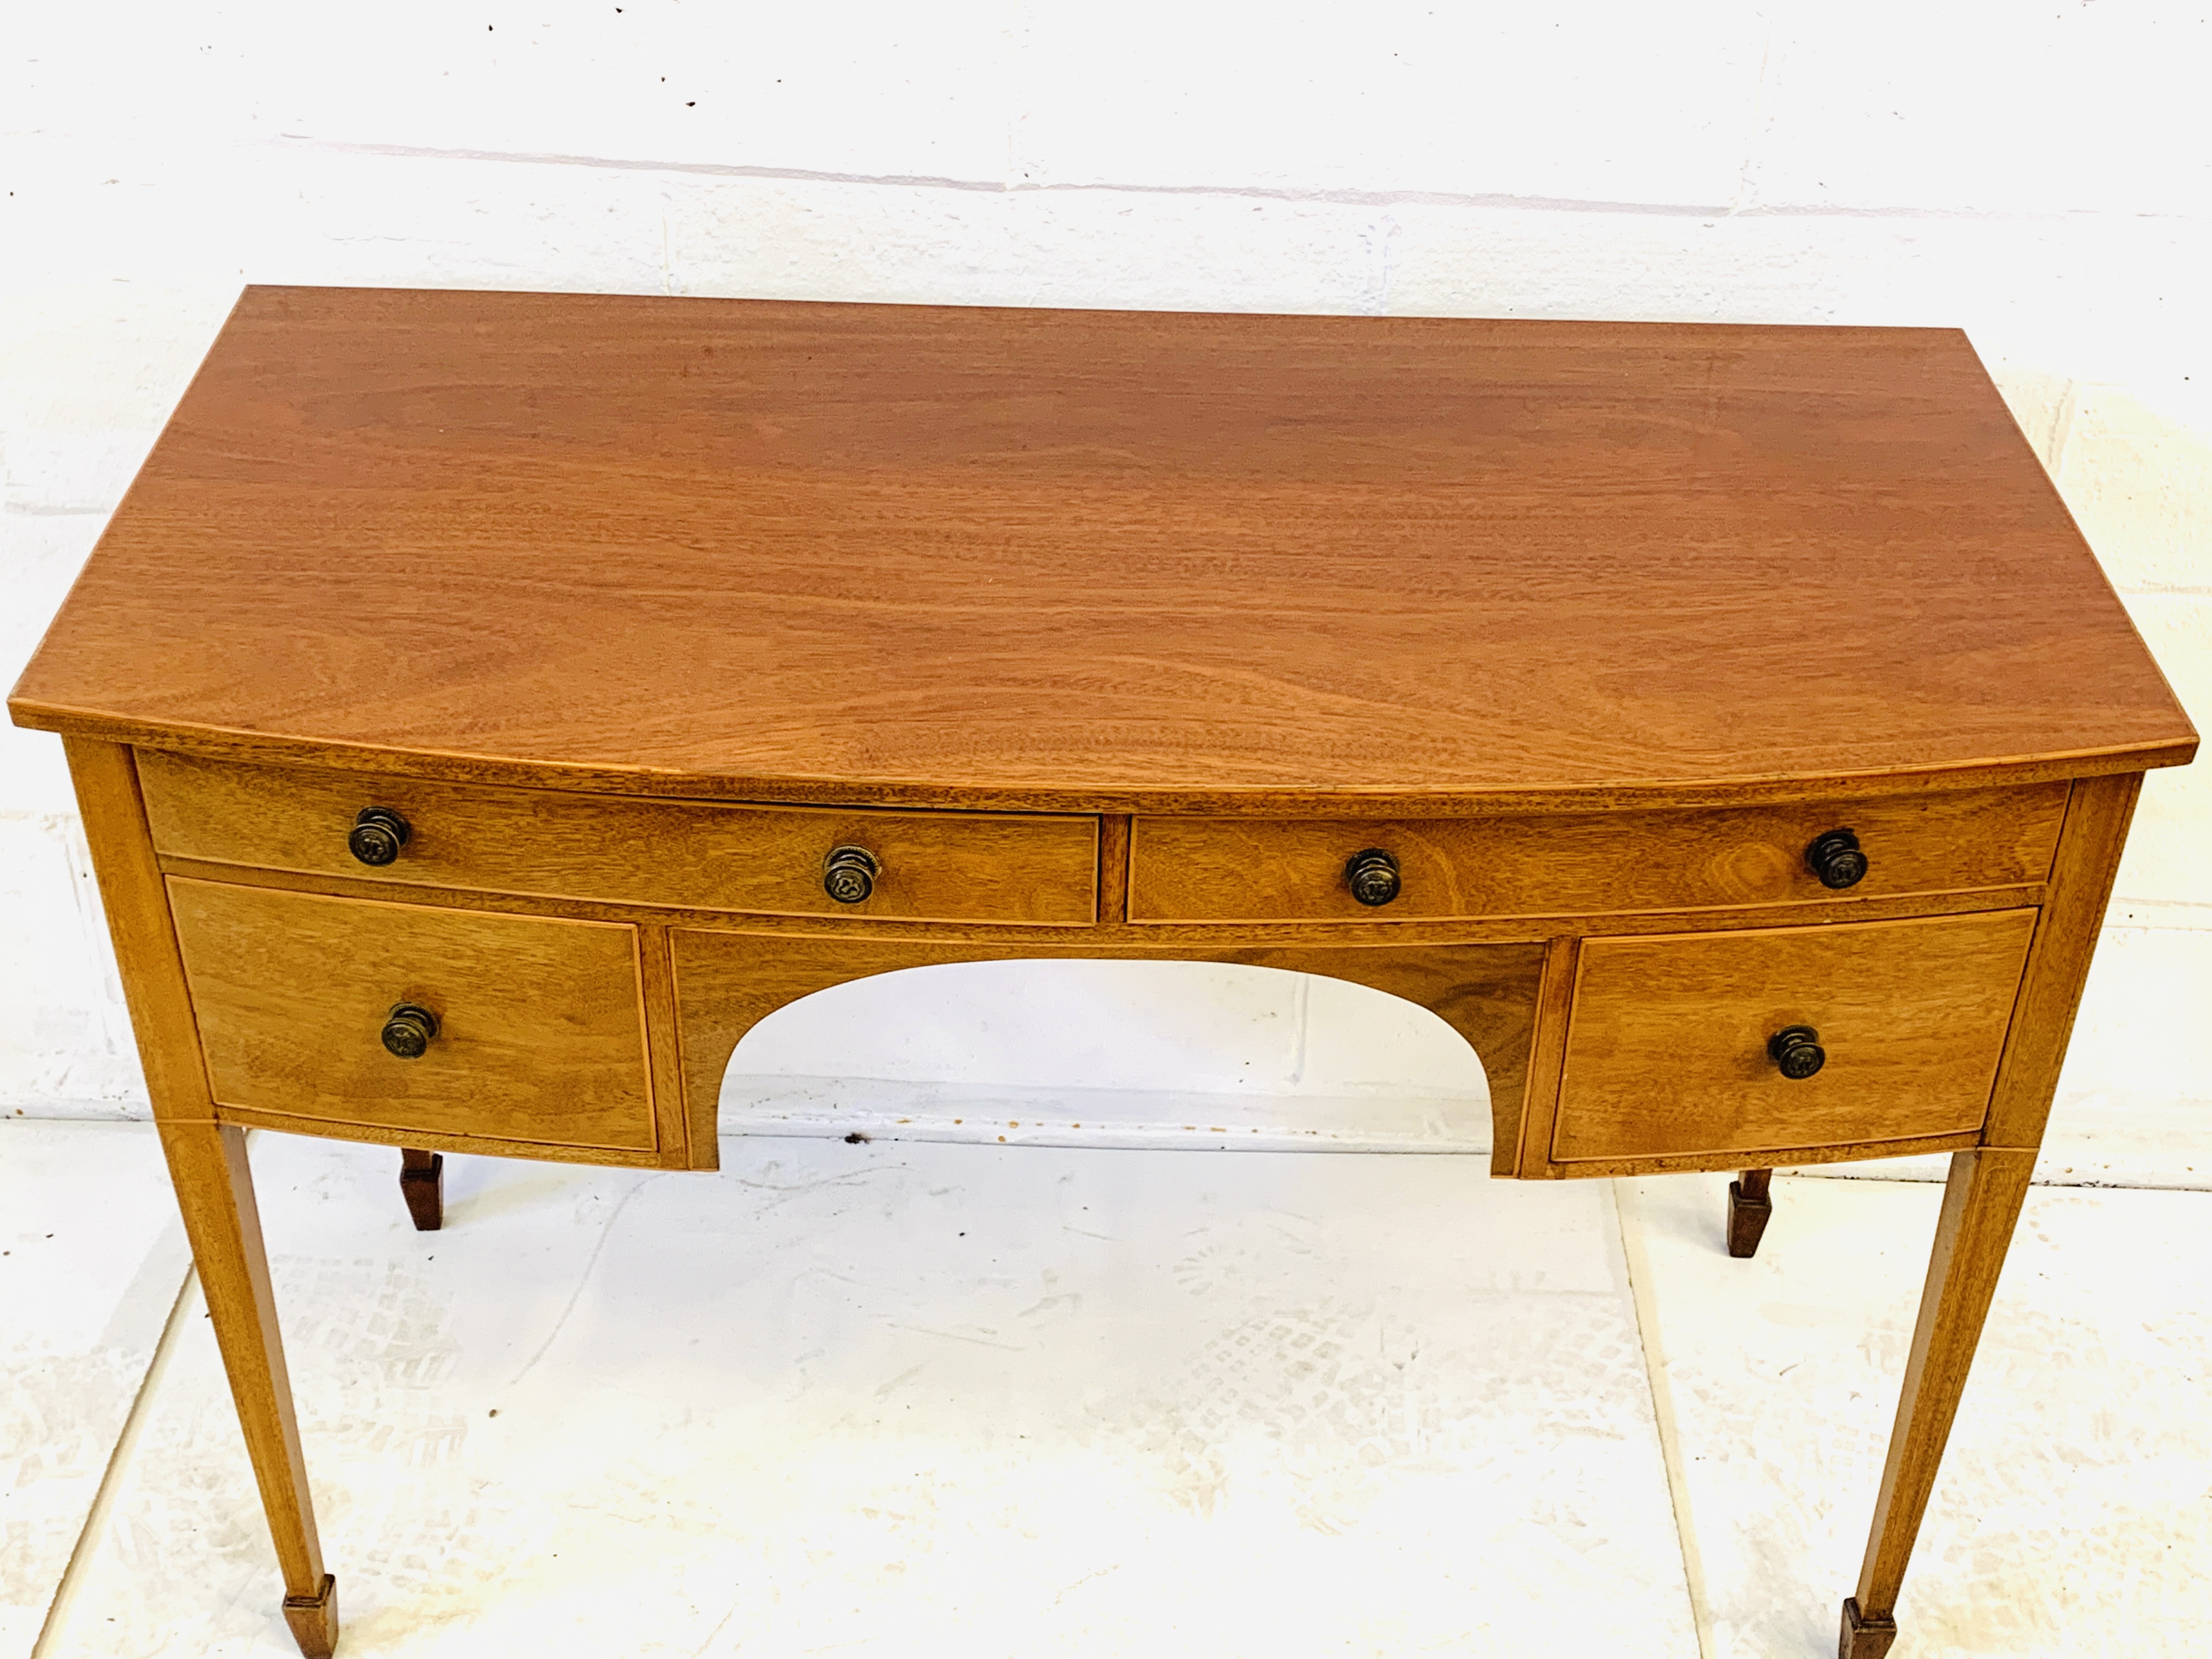 Mahogany bow fronted desk - Image 4 of 6